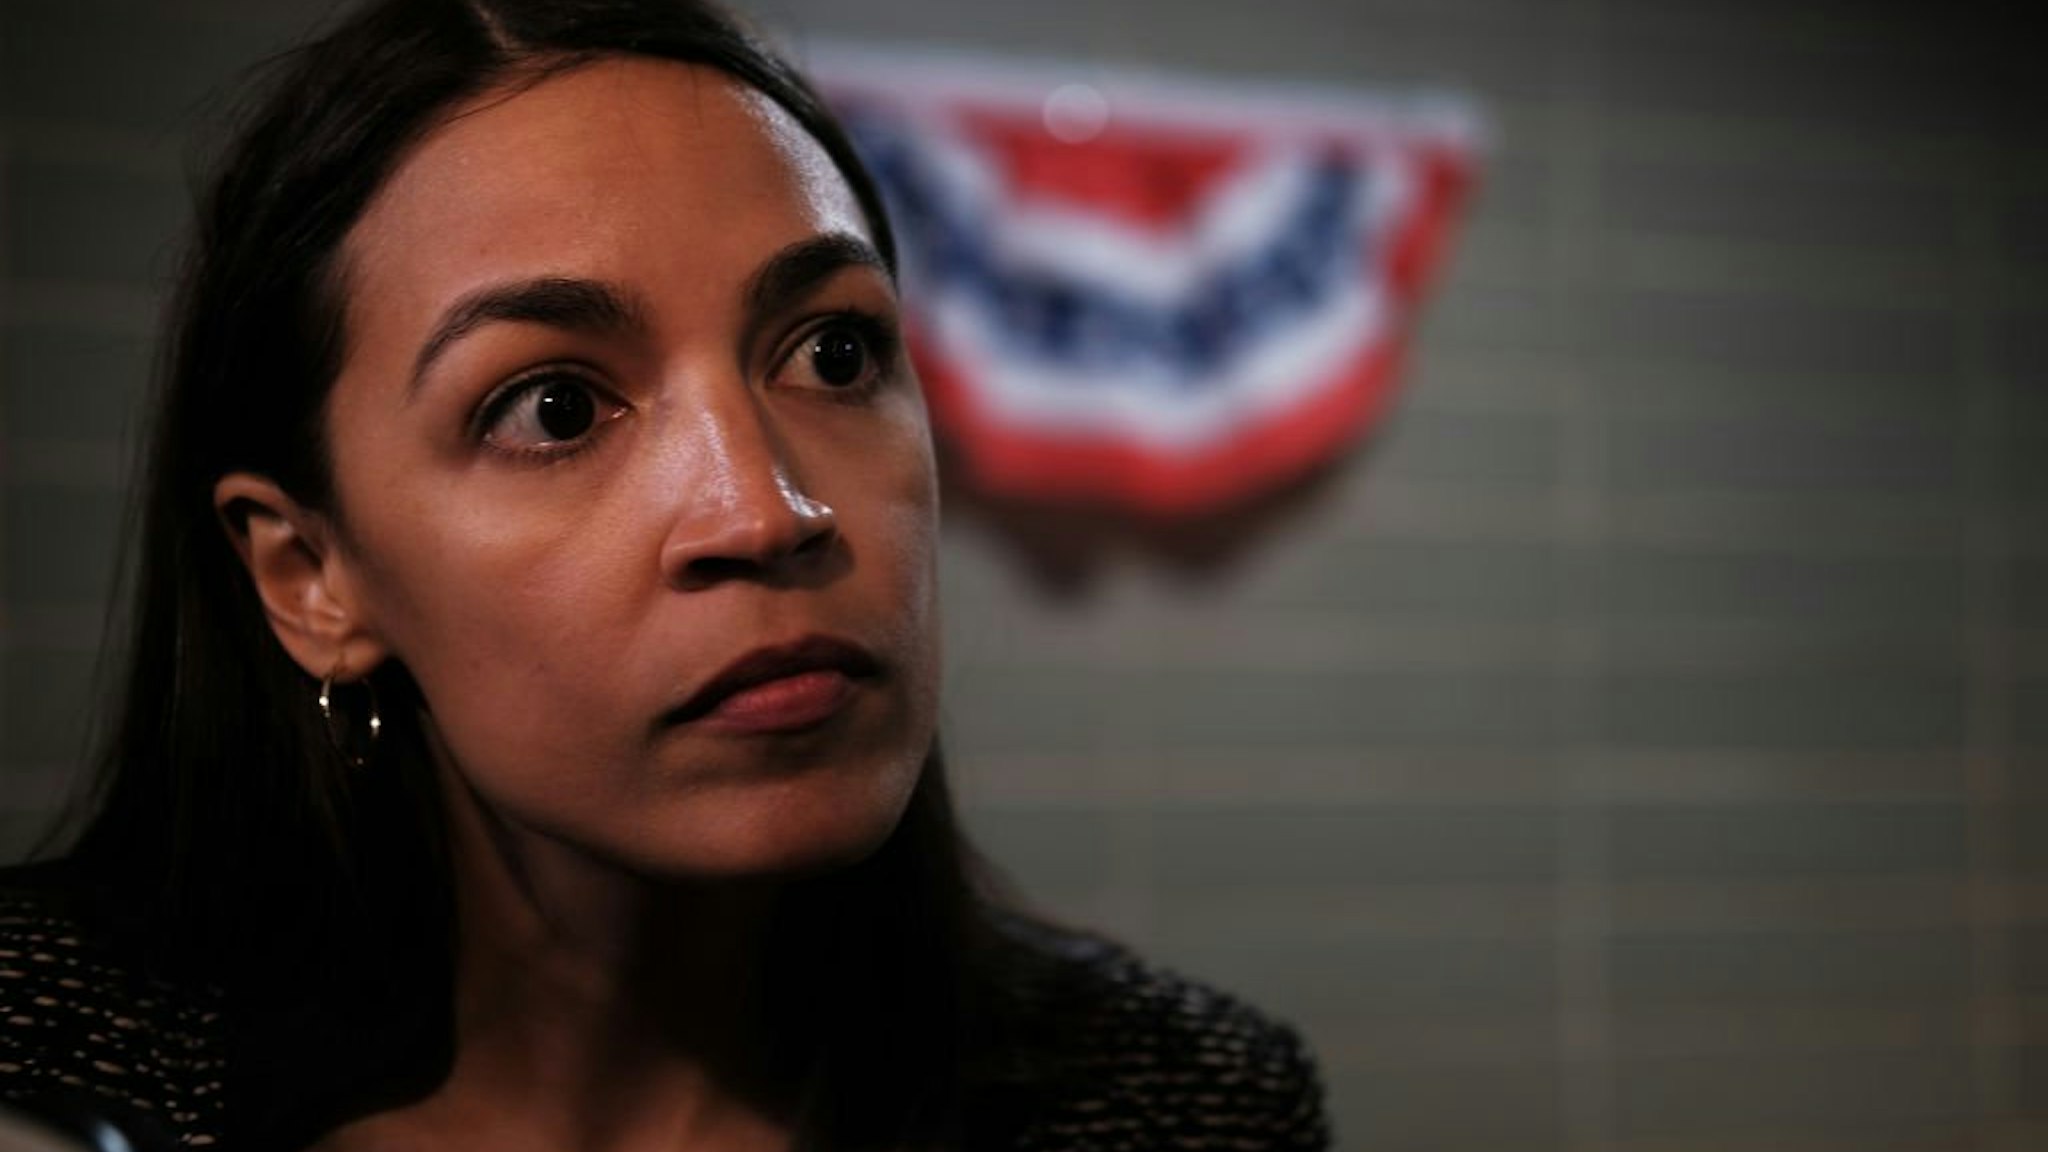 Alexandria Ocasio-Cortez (D-NY) speaks to the media after a public housing town hall at a New York City Housing Authority